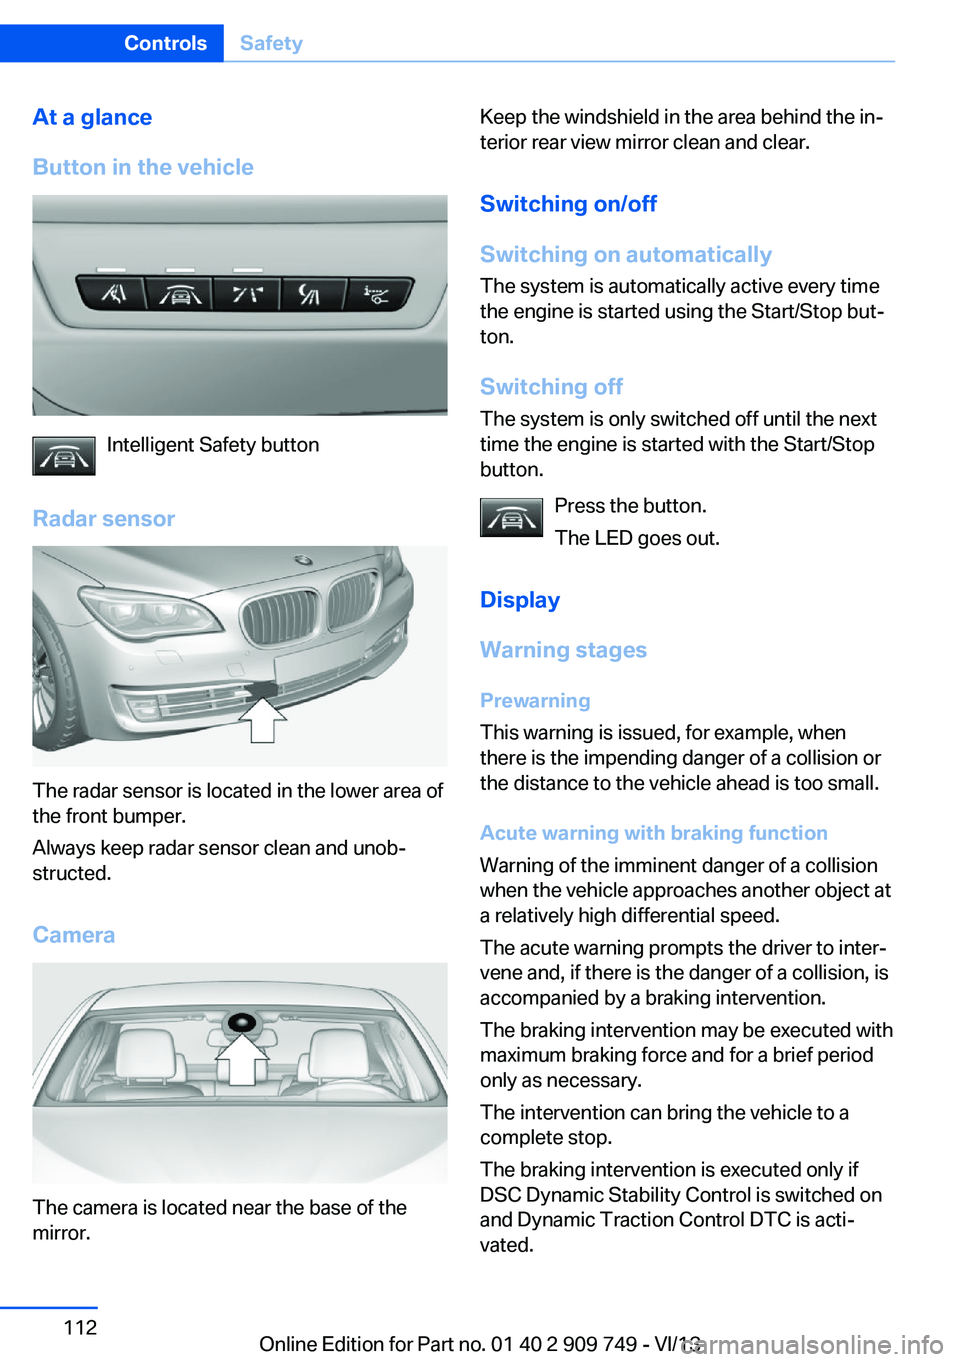 BMW 750LI XDRIVE 2014  Owners Manual At a glance
Button in the vehicle
Intelligent Safety button
Radar sensor
The radar sensor is located in the lower area of
the front bumper.
Always keep radar sensor clean and unob‐
structed.
Camera
